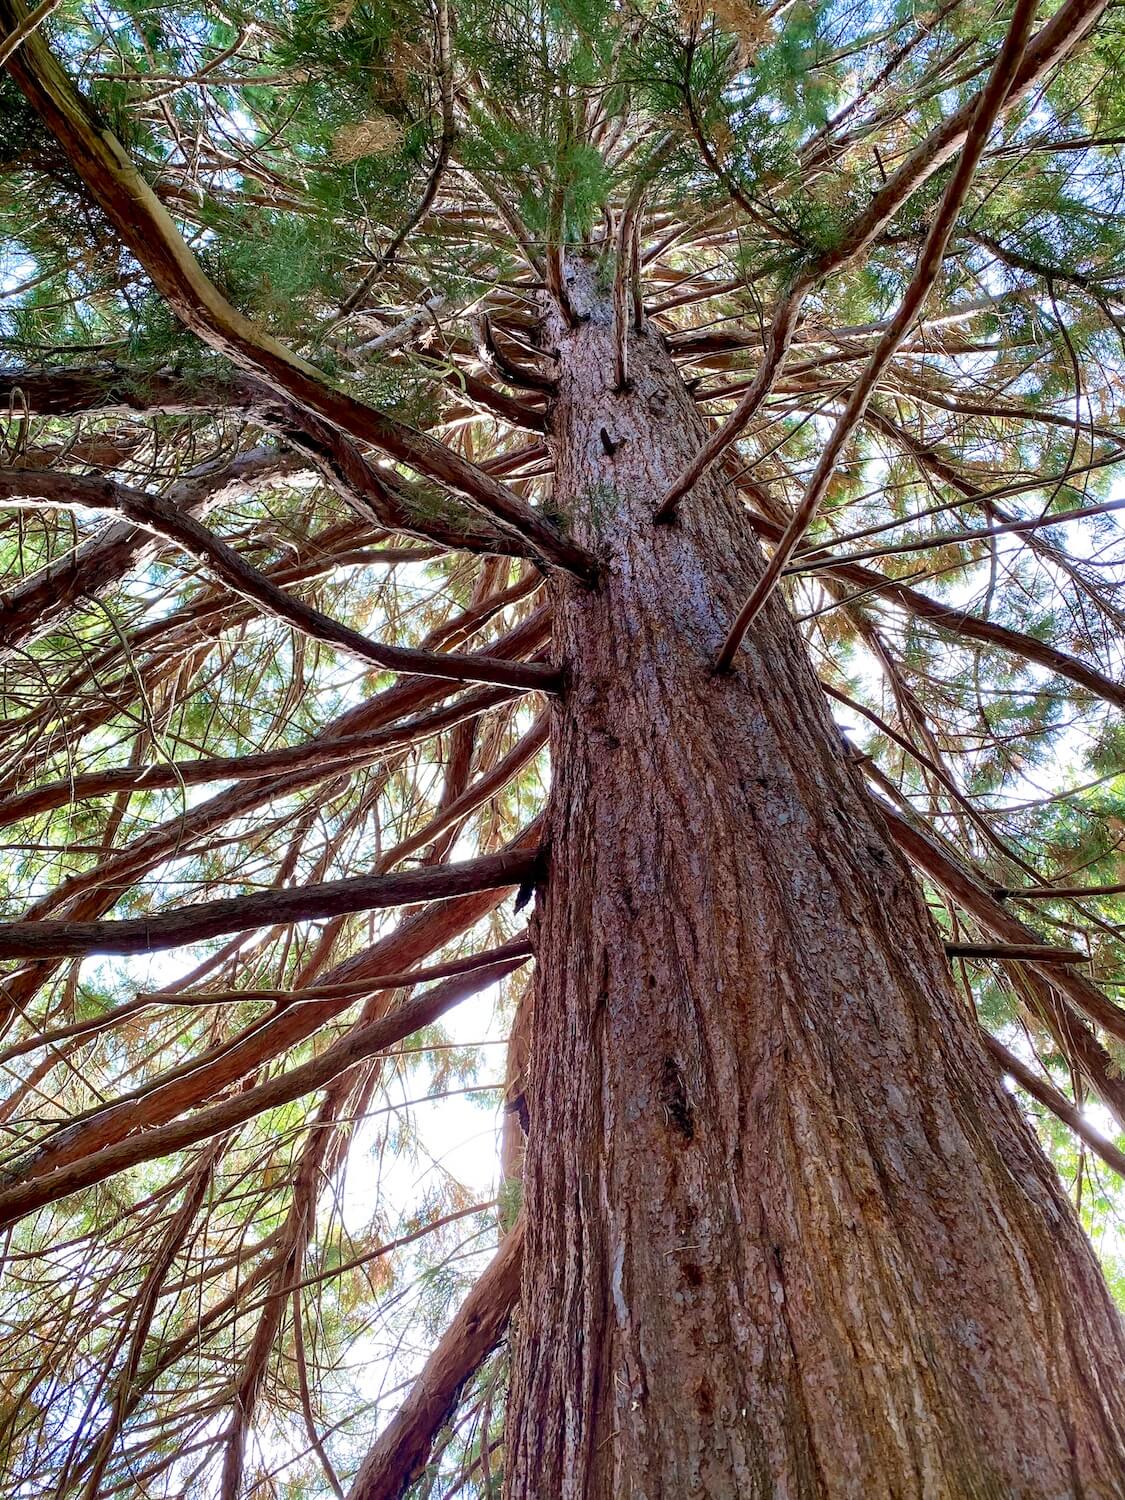 The branches of a redwood tree create a geometrical design leading up the trunk of a redwood tree, as taken from the base.  The needles are a mixture of green and gold and the bark has a rich red texture.  